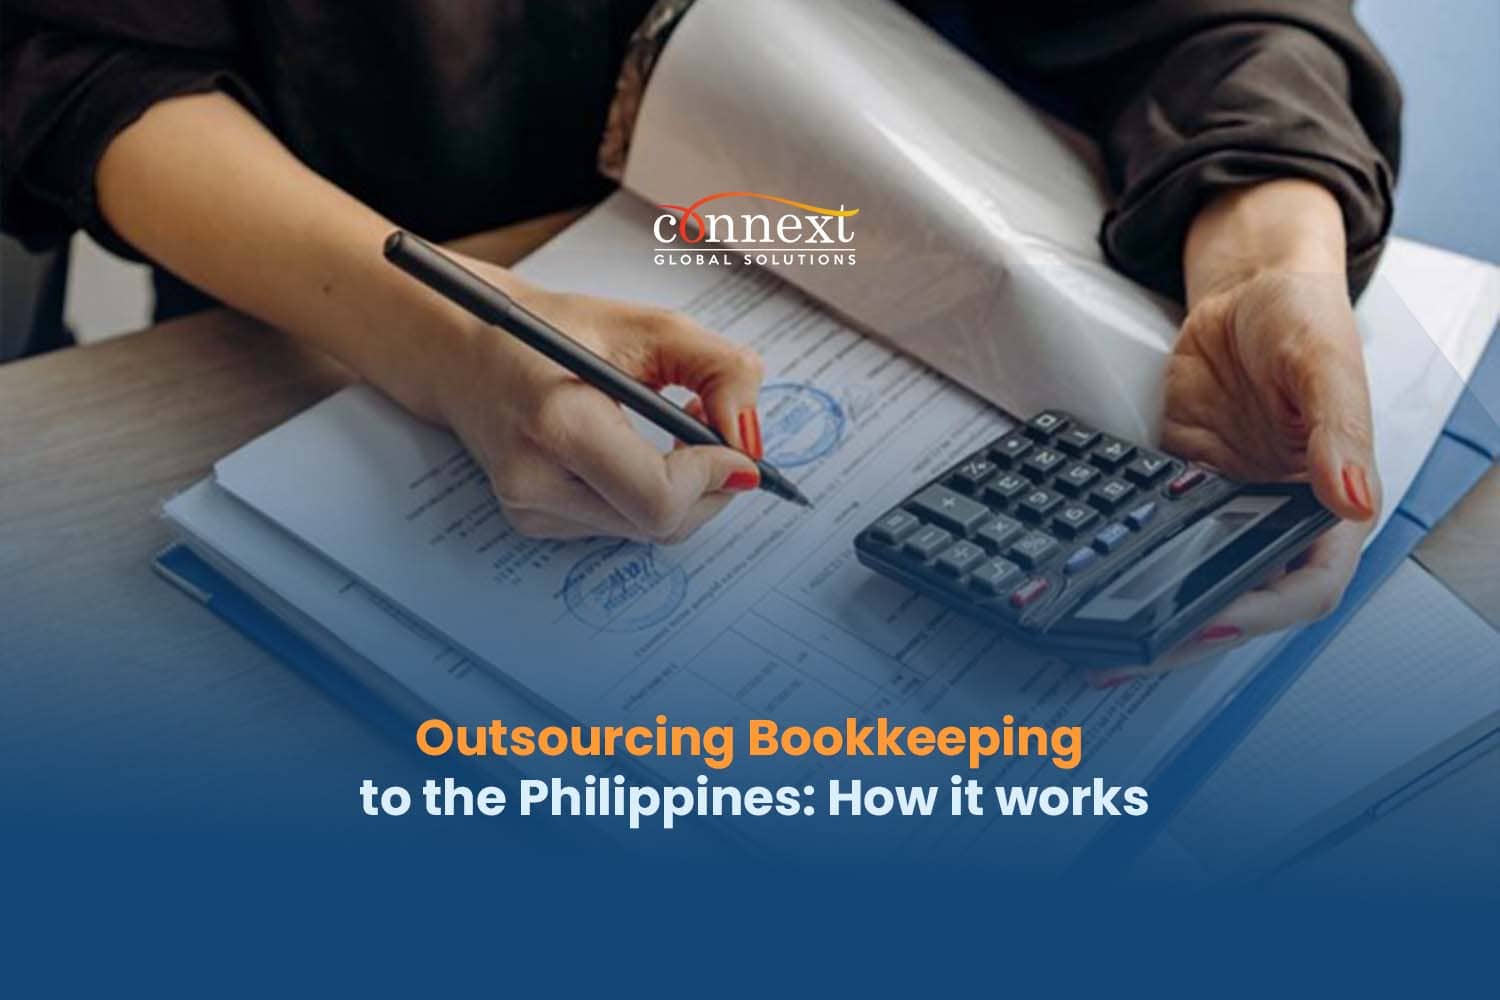 Outsourcing Bookkeeping to the Philippines: How it works